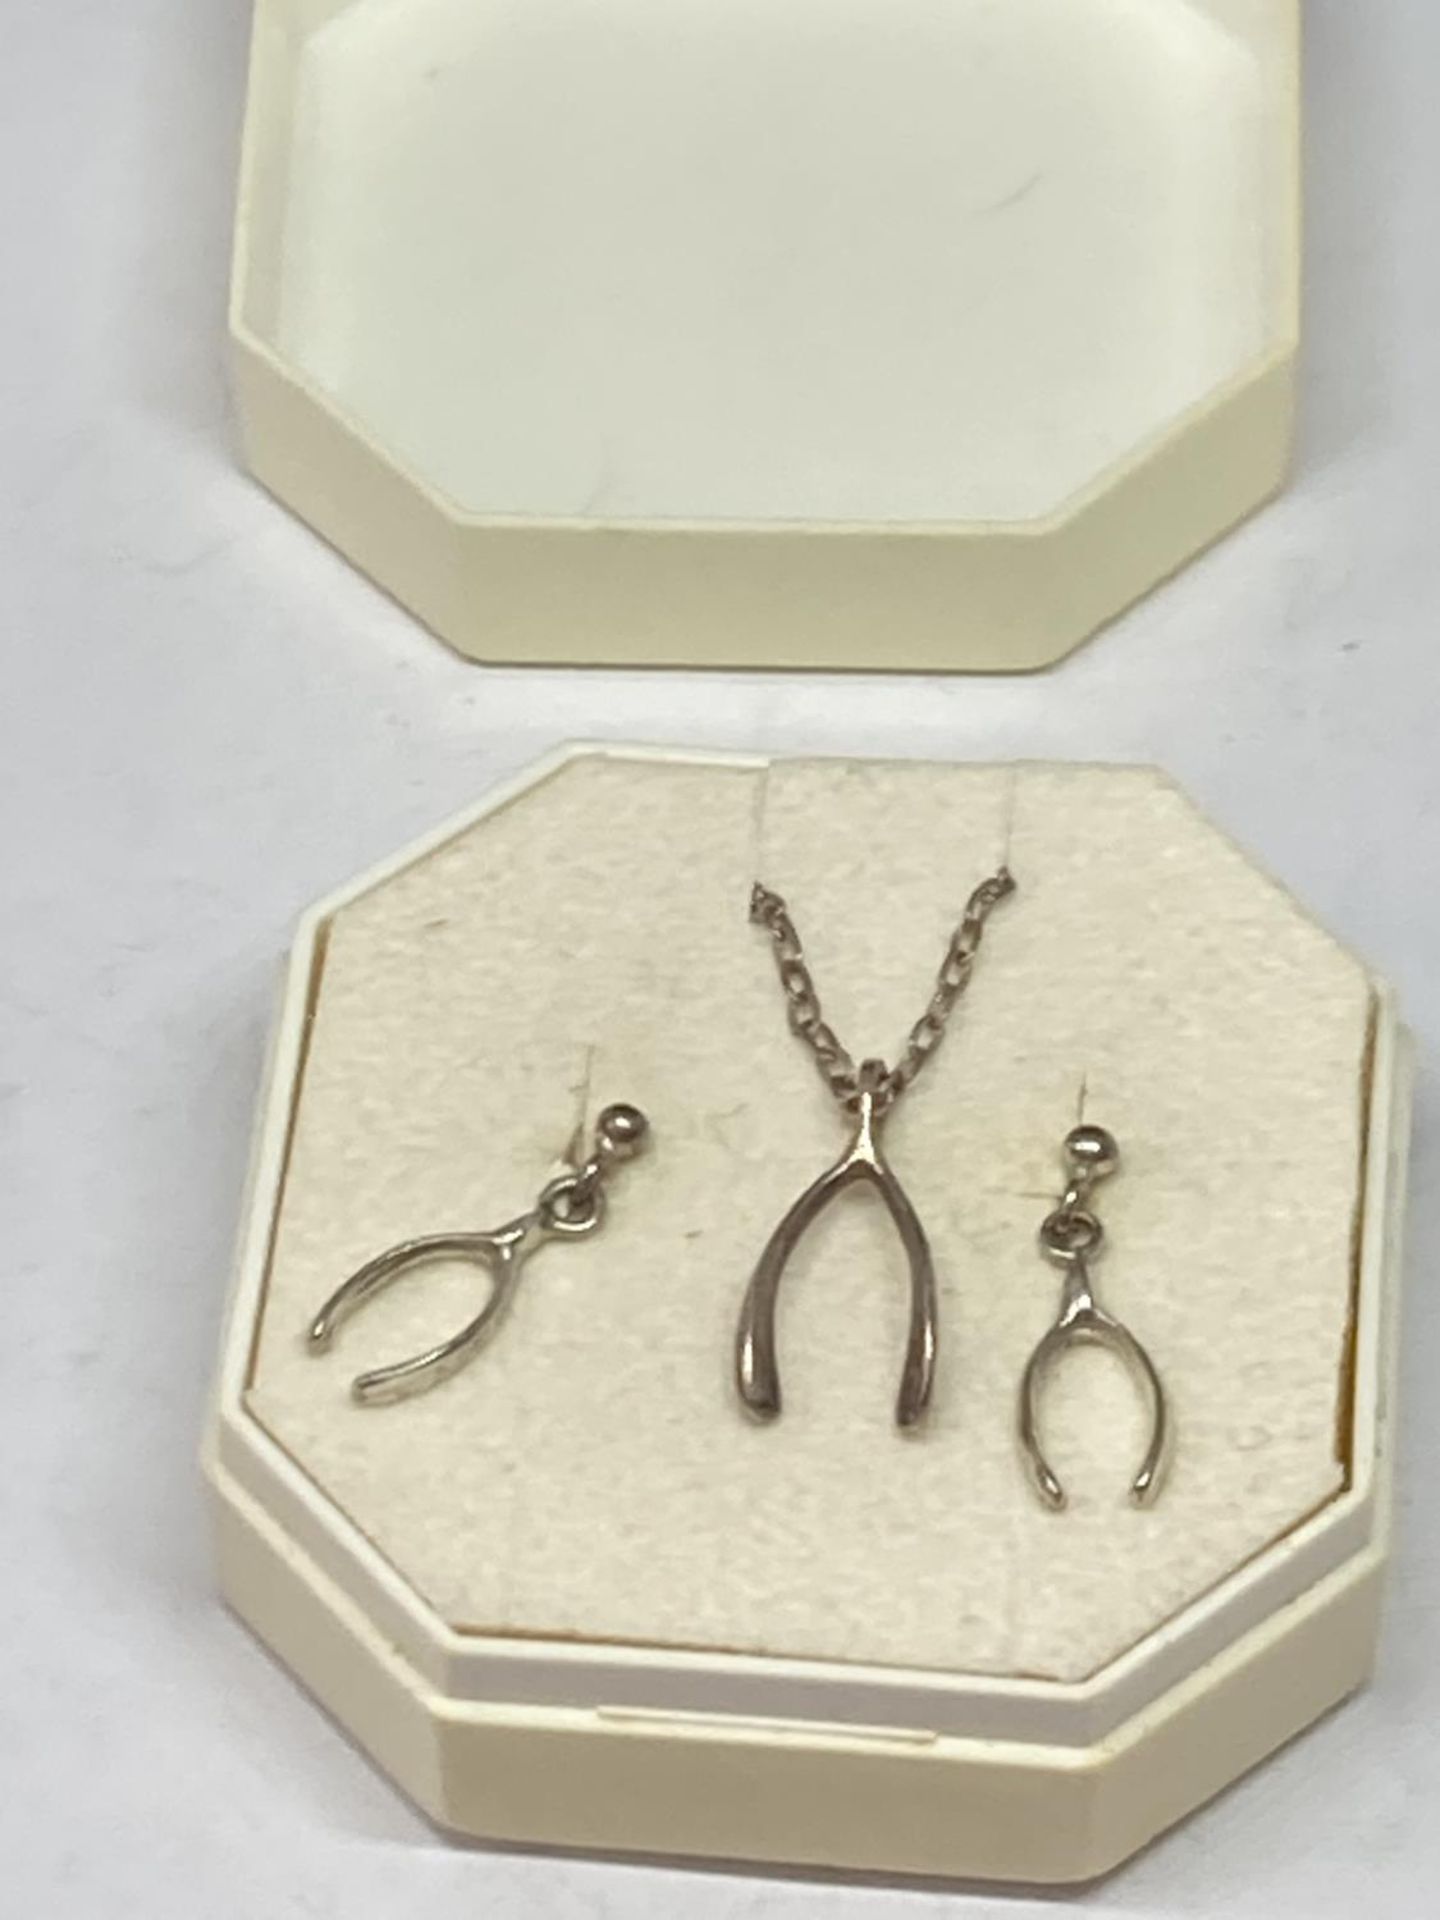 A SILVER WISHBONE NECKLACE AND EARRINGS